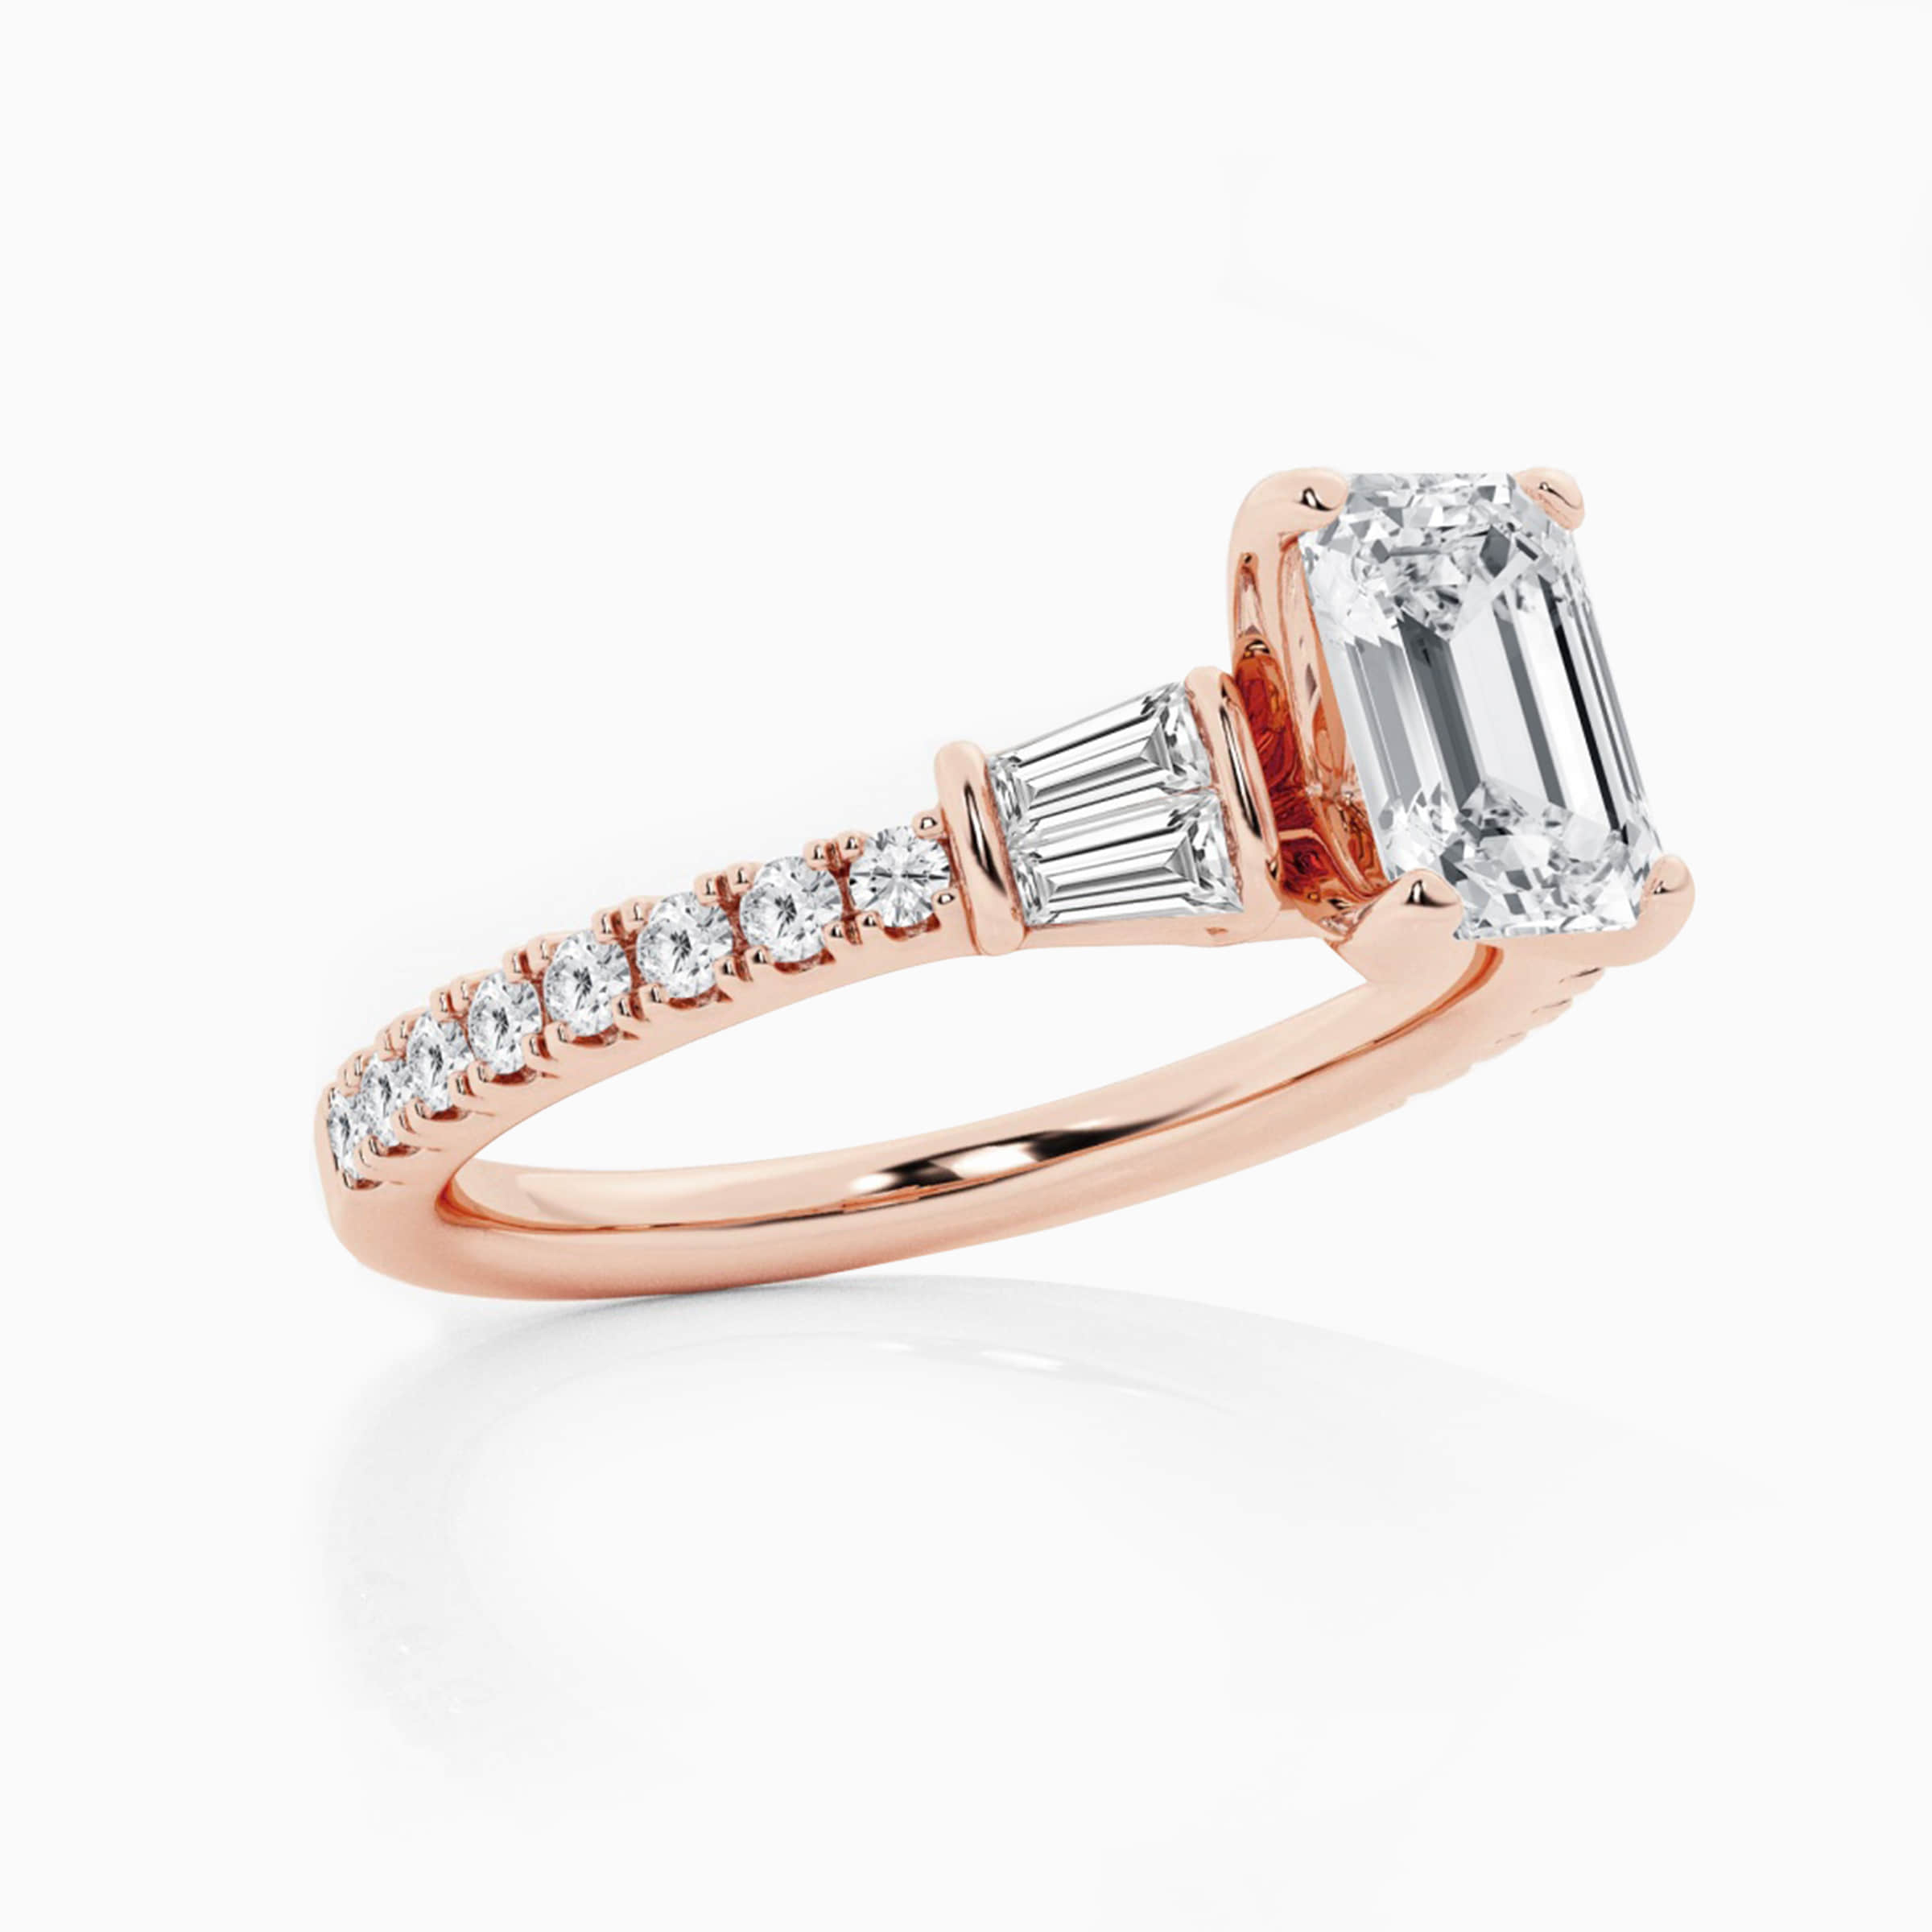 Darry Ring emerald cut three stone engagement ring rose gold